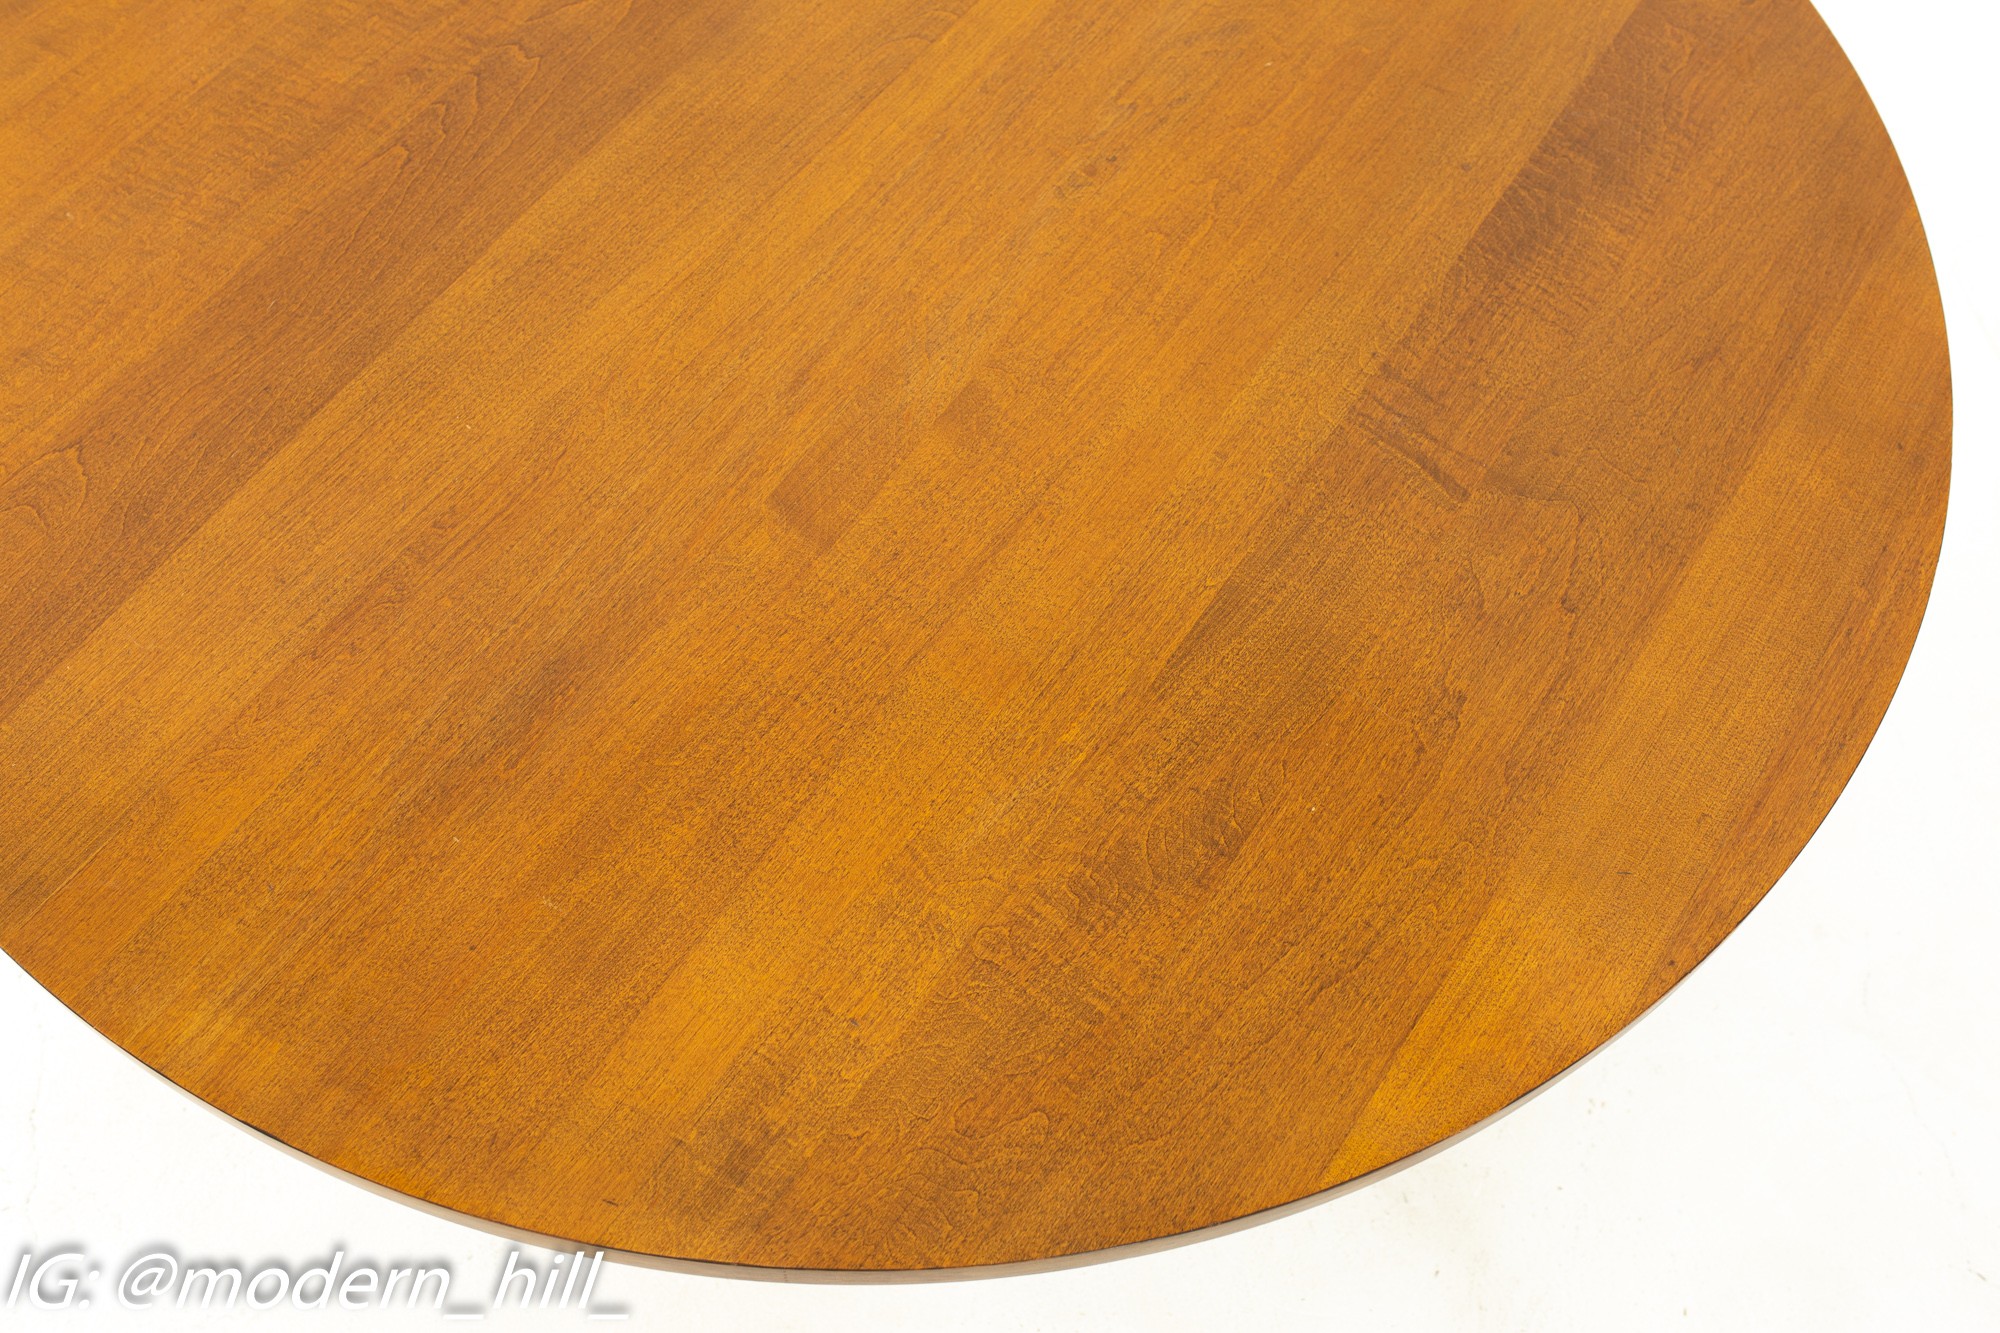 Paul Mccobb for Planner Group Mid Century Round Coffee Table